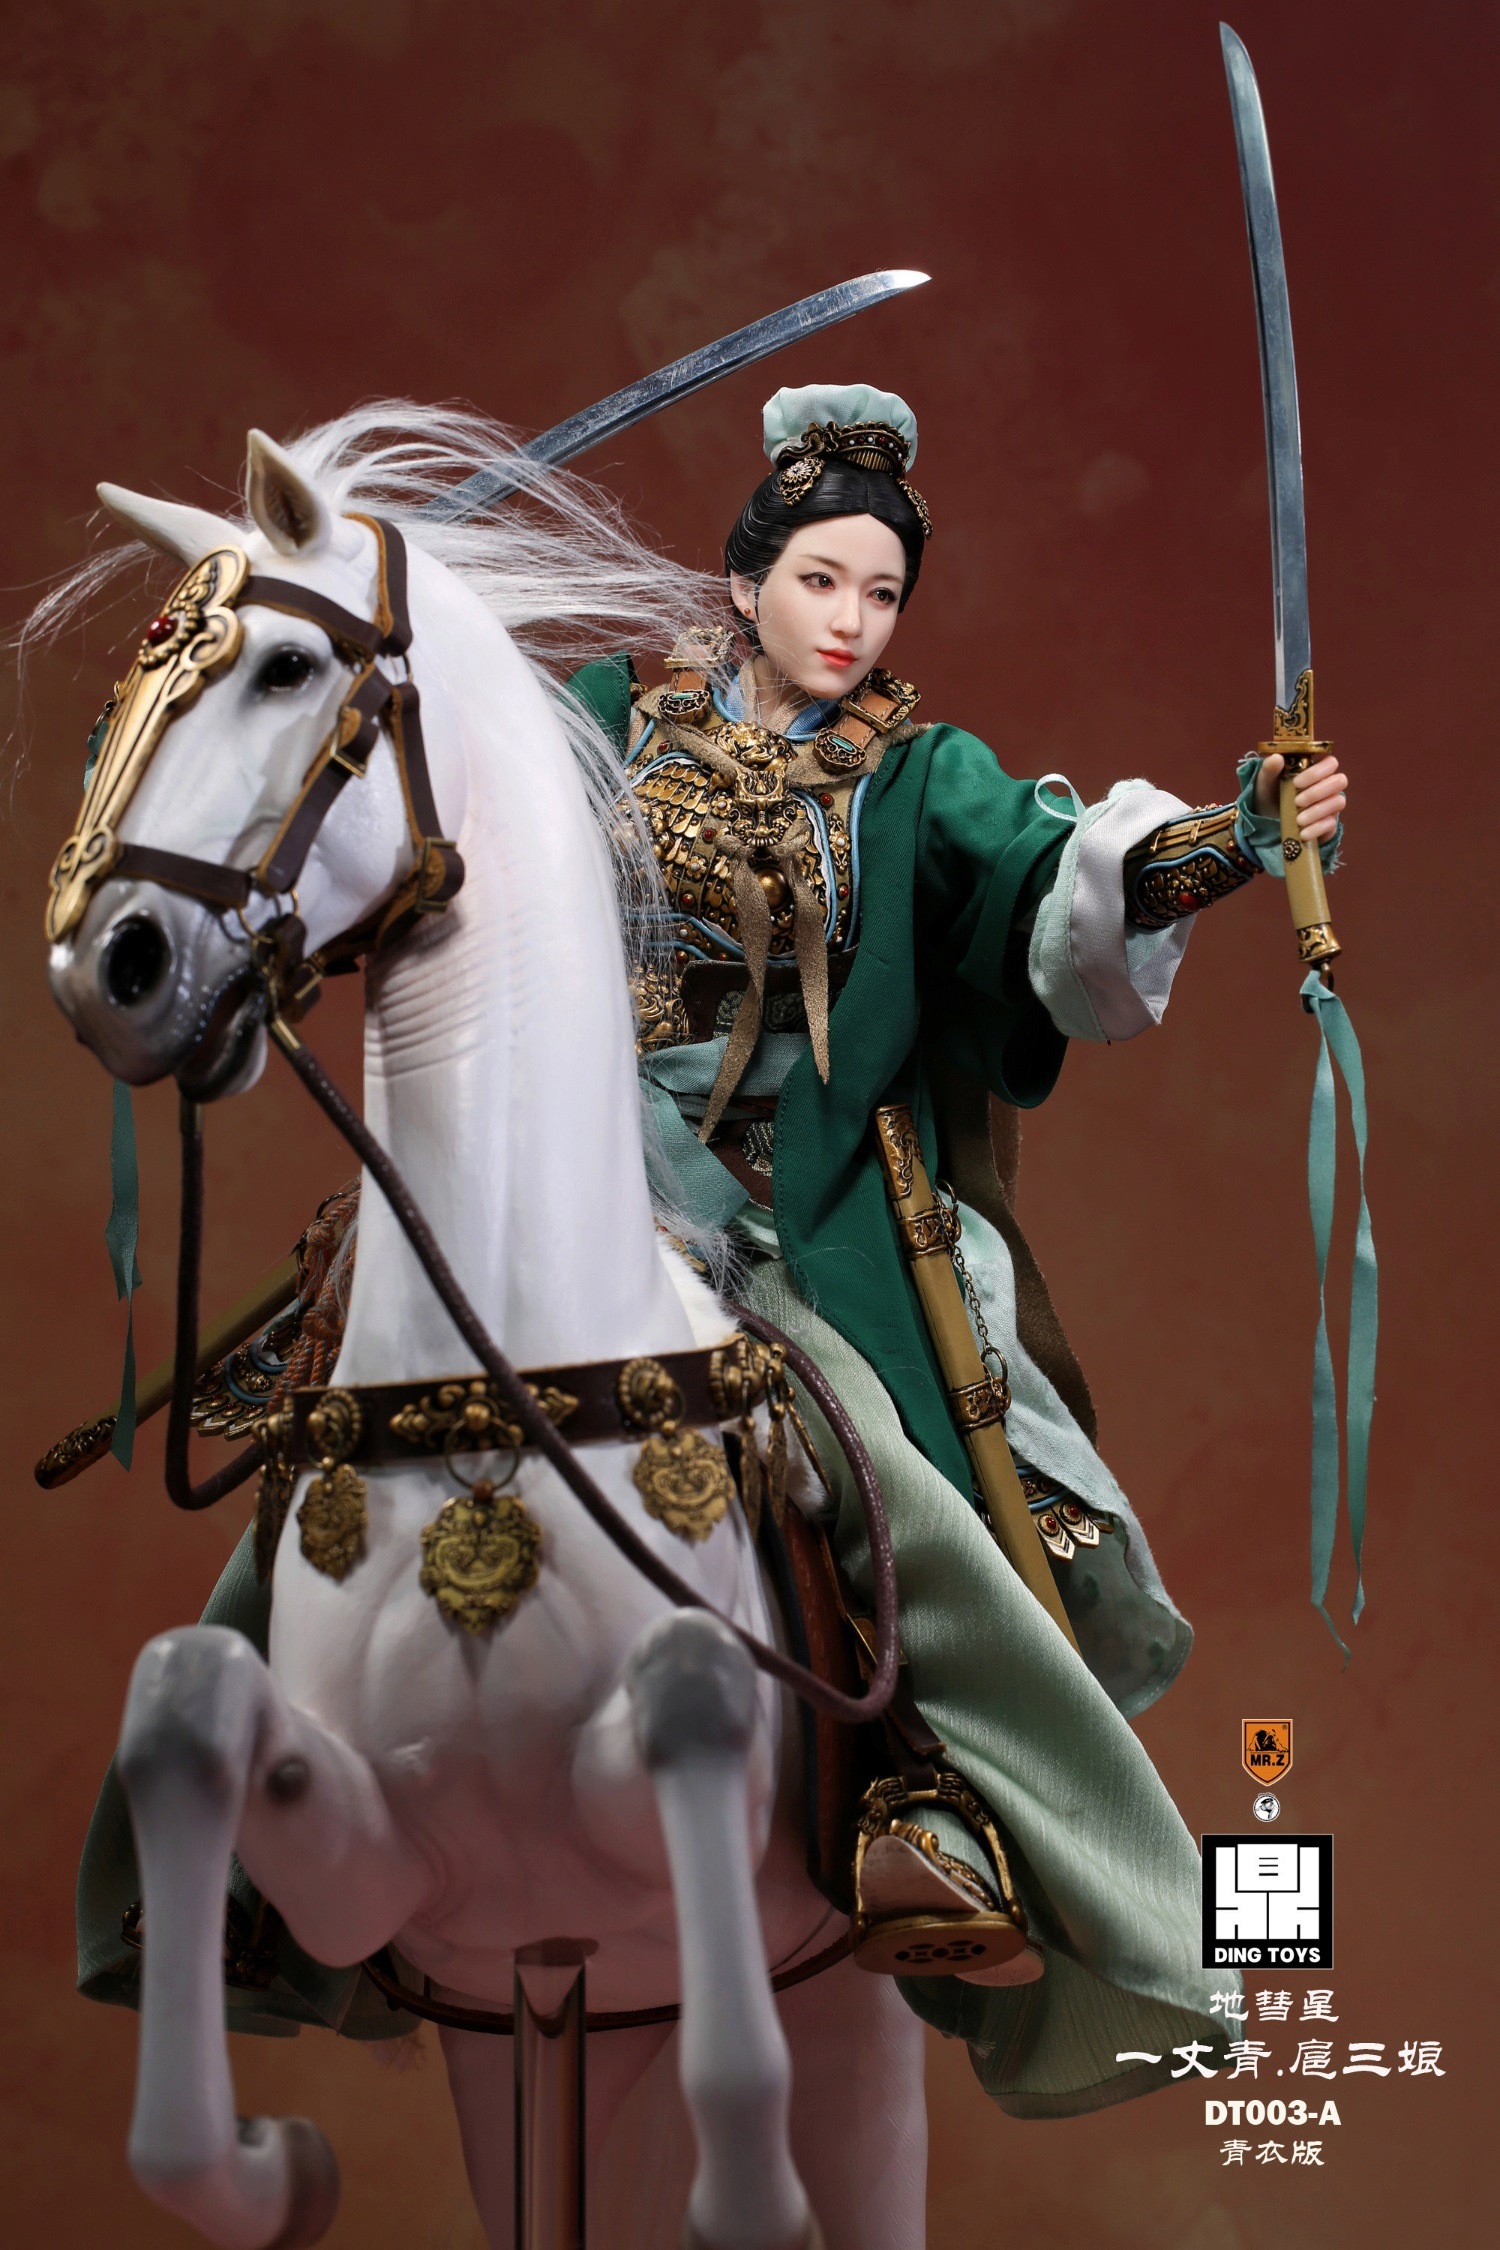 DingToys - NEW PRODUCT: Mr.Z x Ding Toys DT003 1/6 Scale 《Water Margin》Shiying Zhang (Green and Red versions), Horse (White) 11235